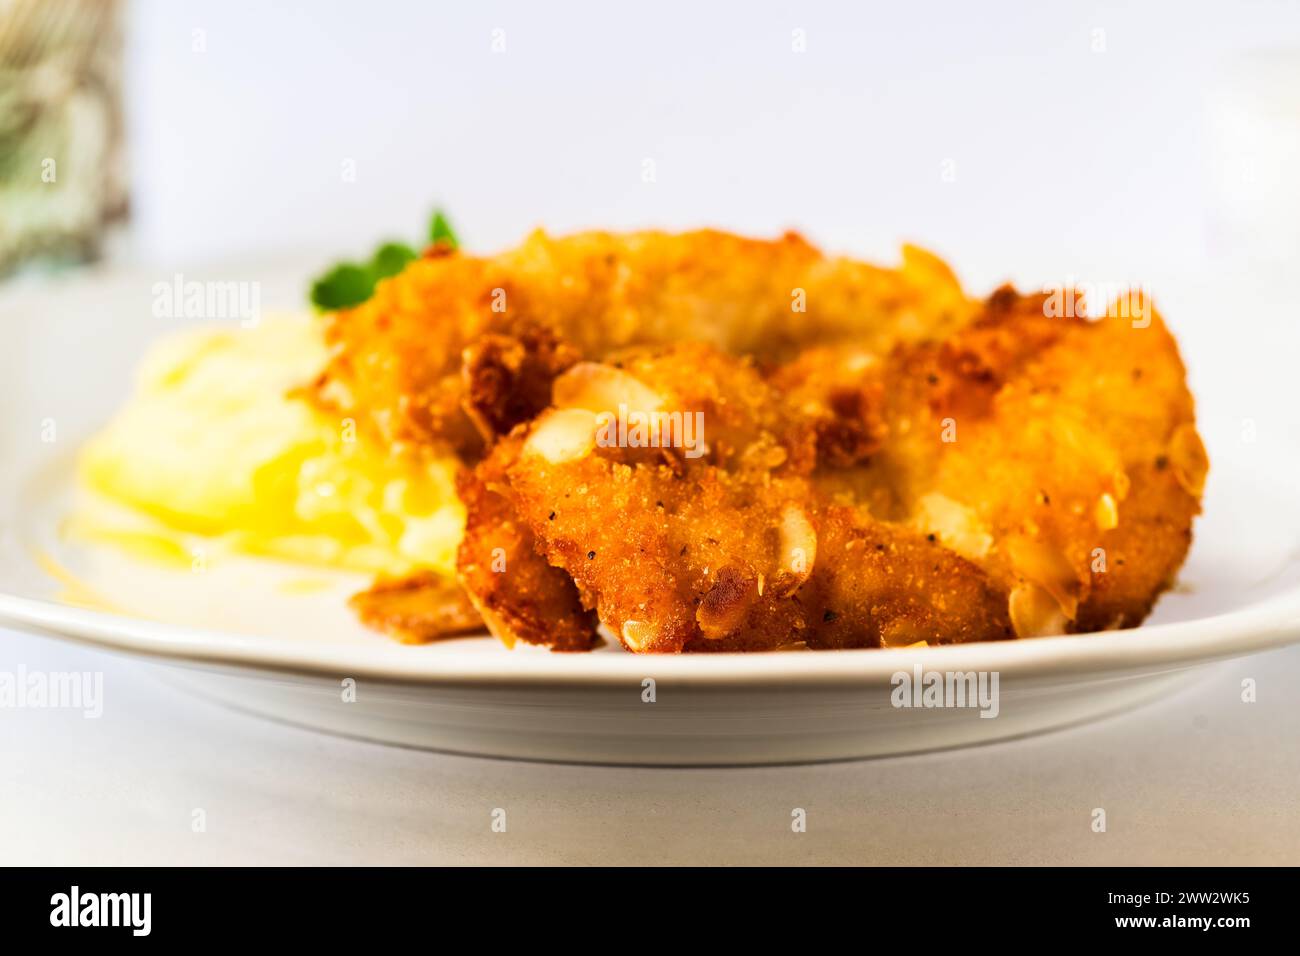 Fried schnitzel in breadcrumb with almonds, mashed potato on white plate, closeup. Stock Photo